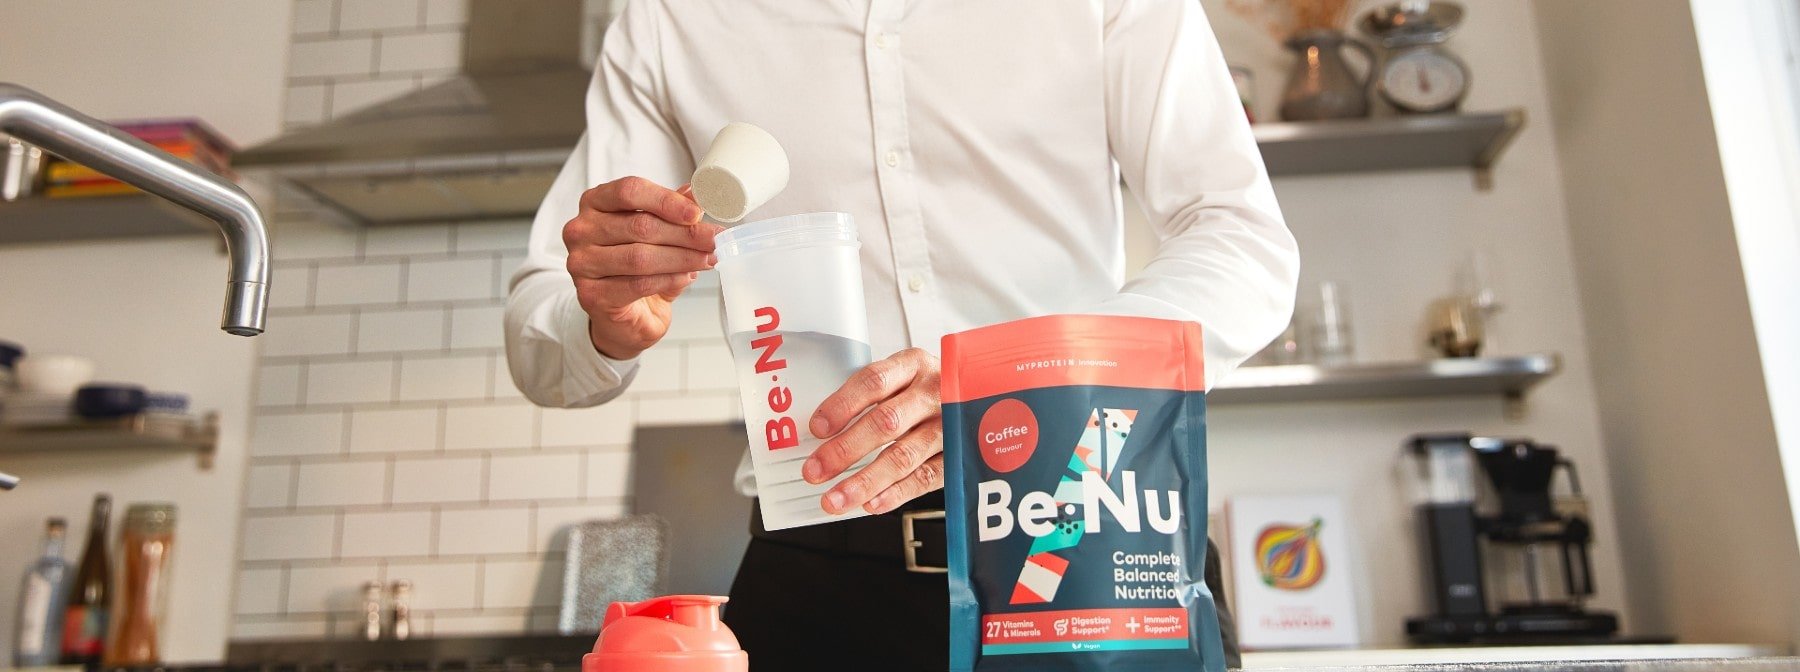 Introducing BeNu: What To Expect From Your Complete Nutrition Shake